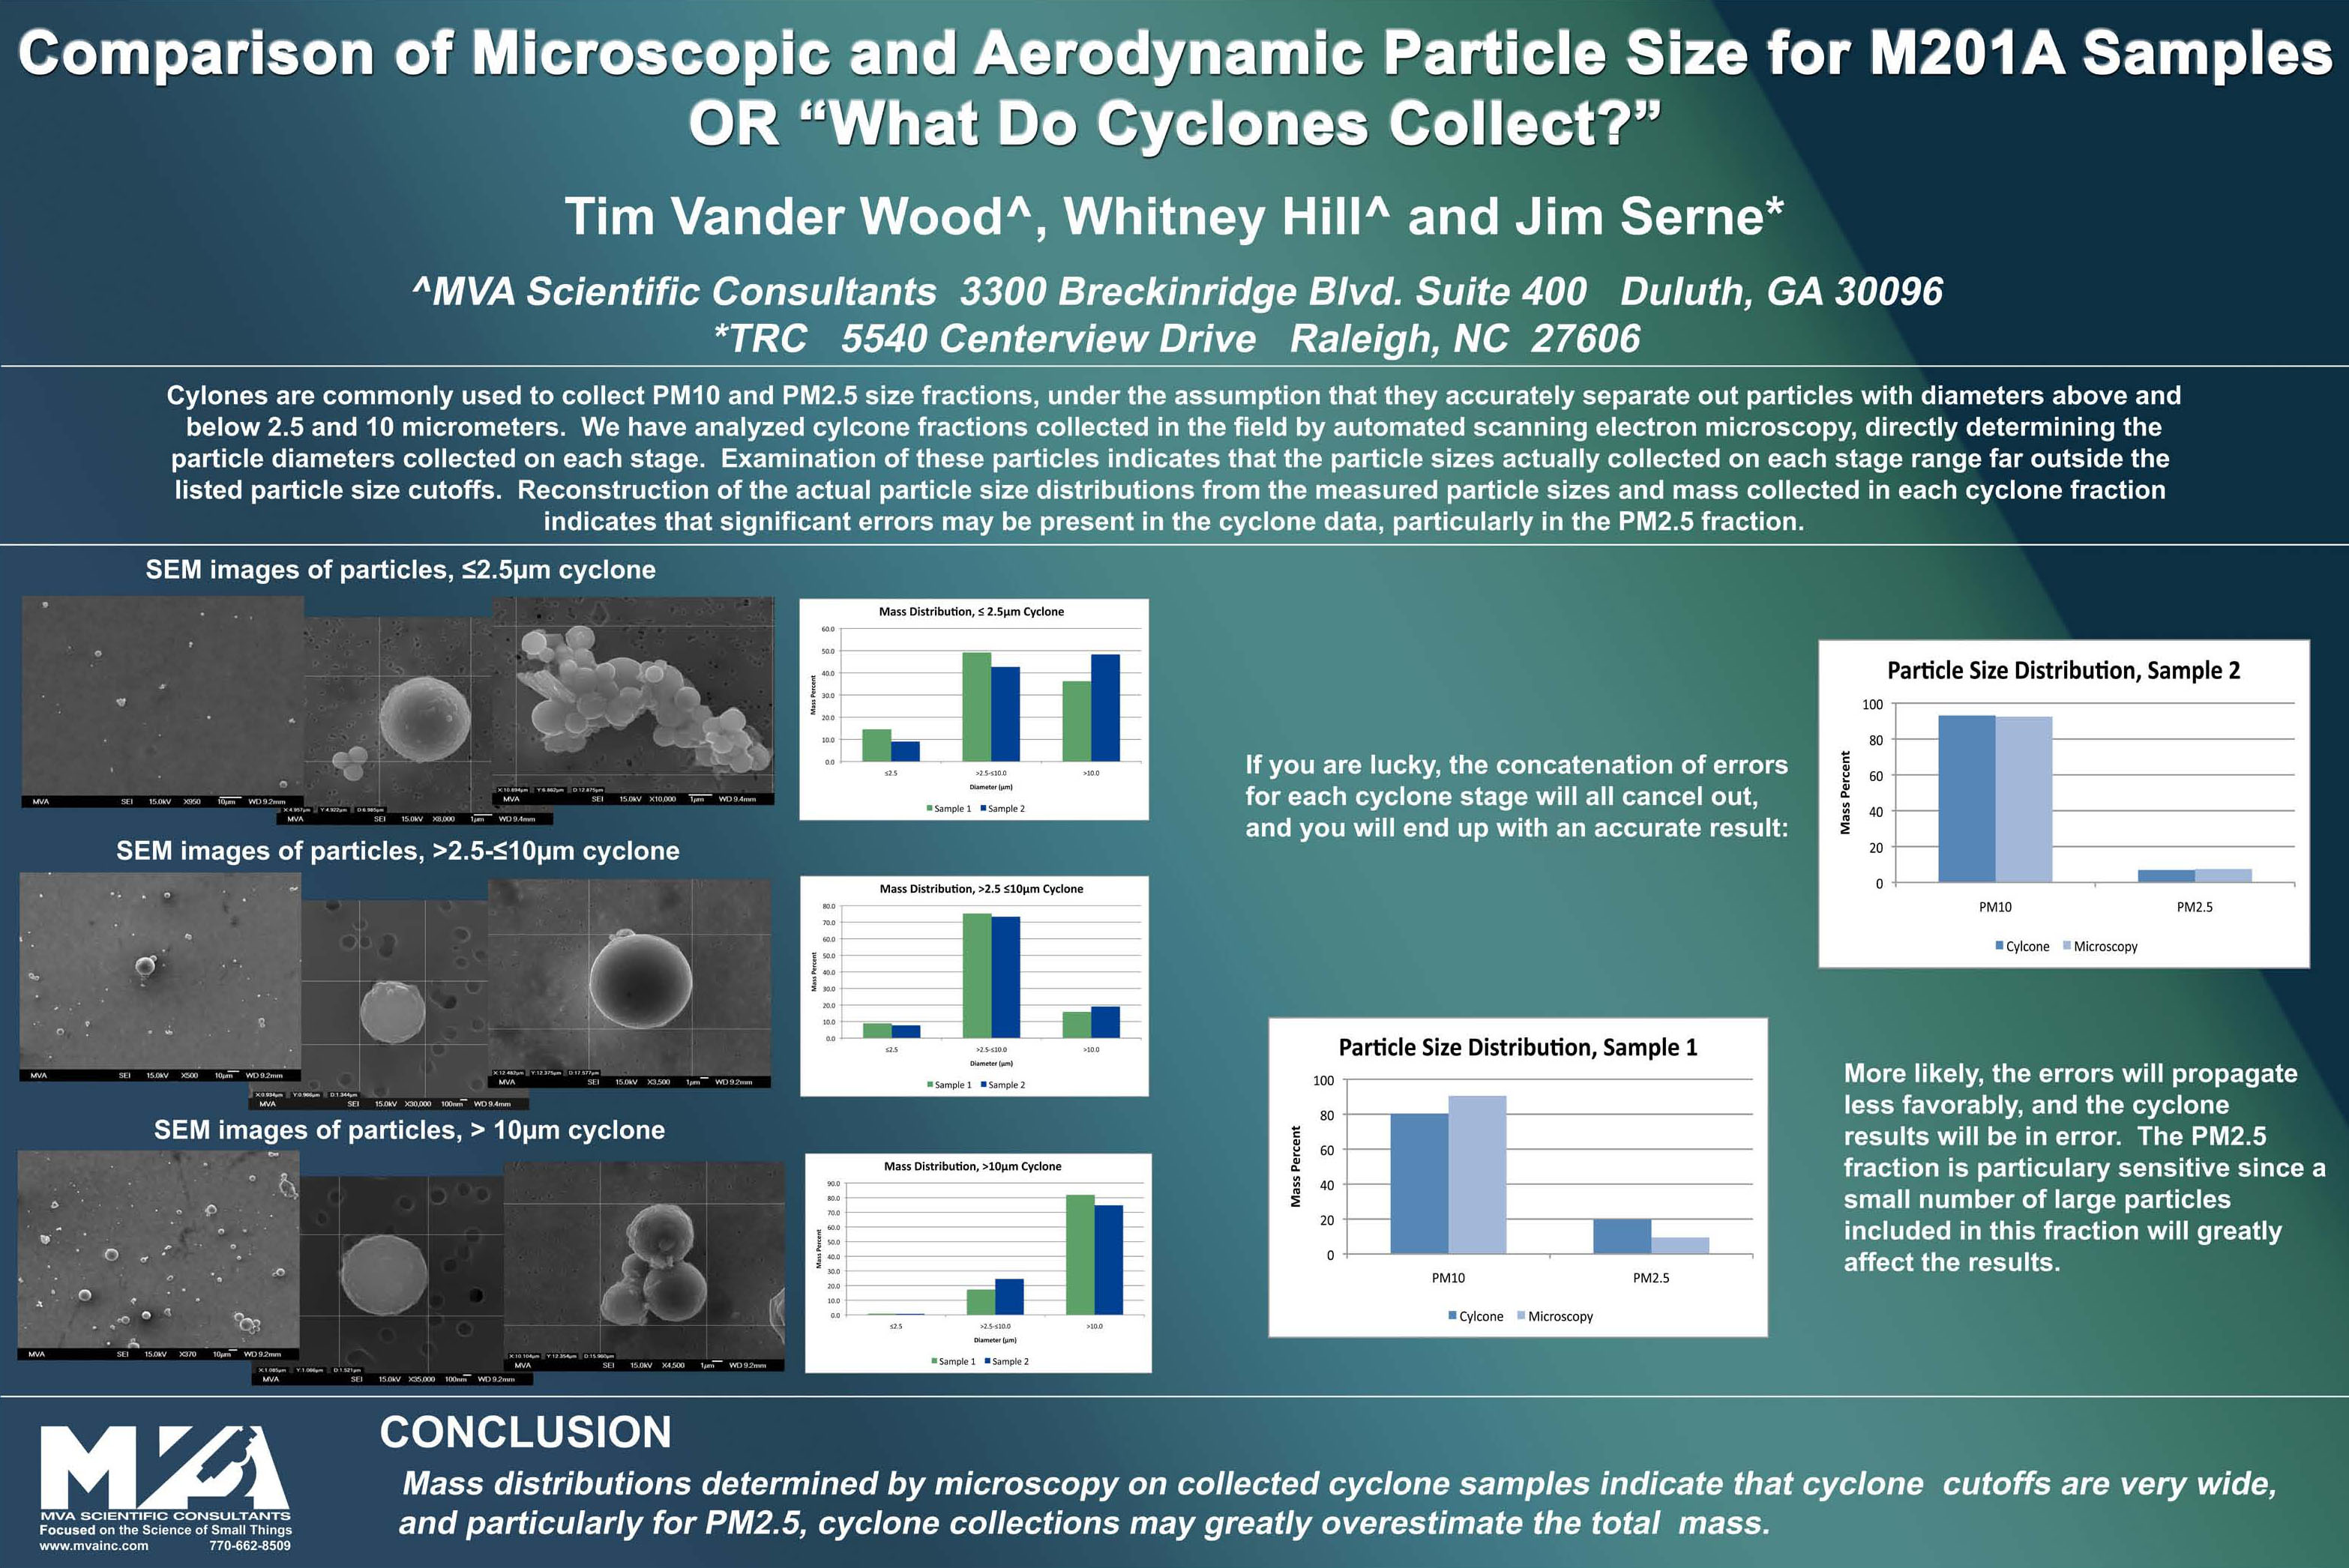 Stack Testing Comparison of Microscopic and Aerodynamic Particle Size